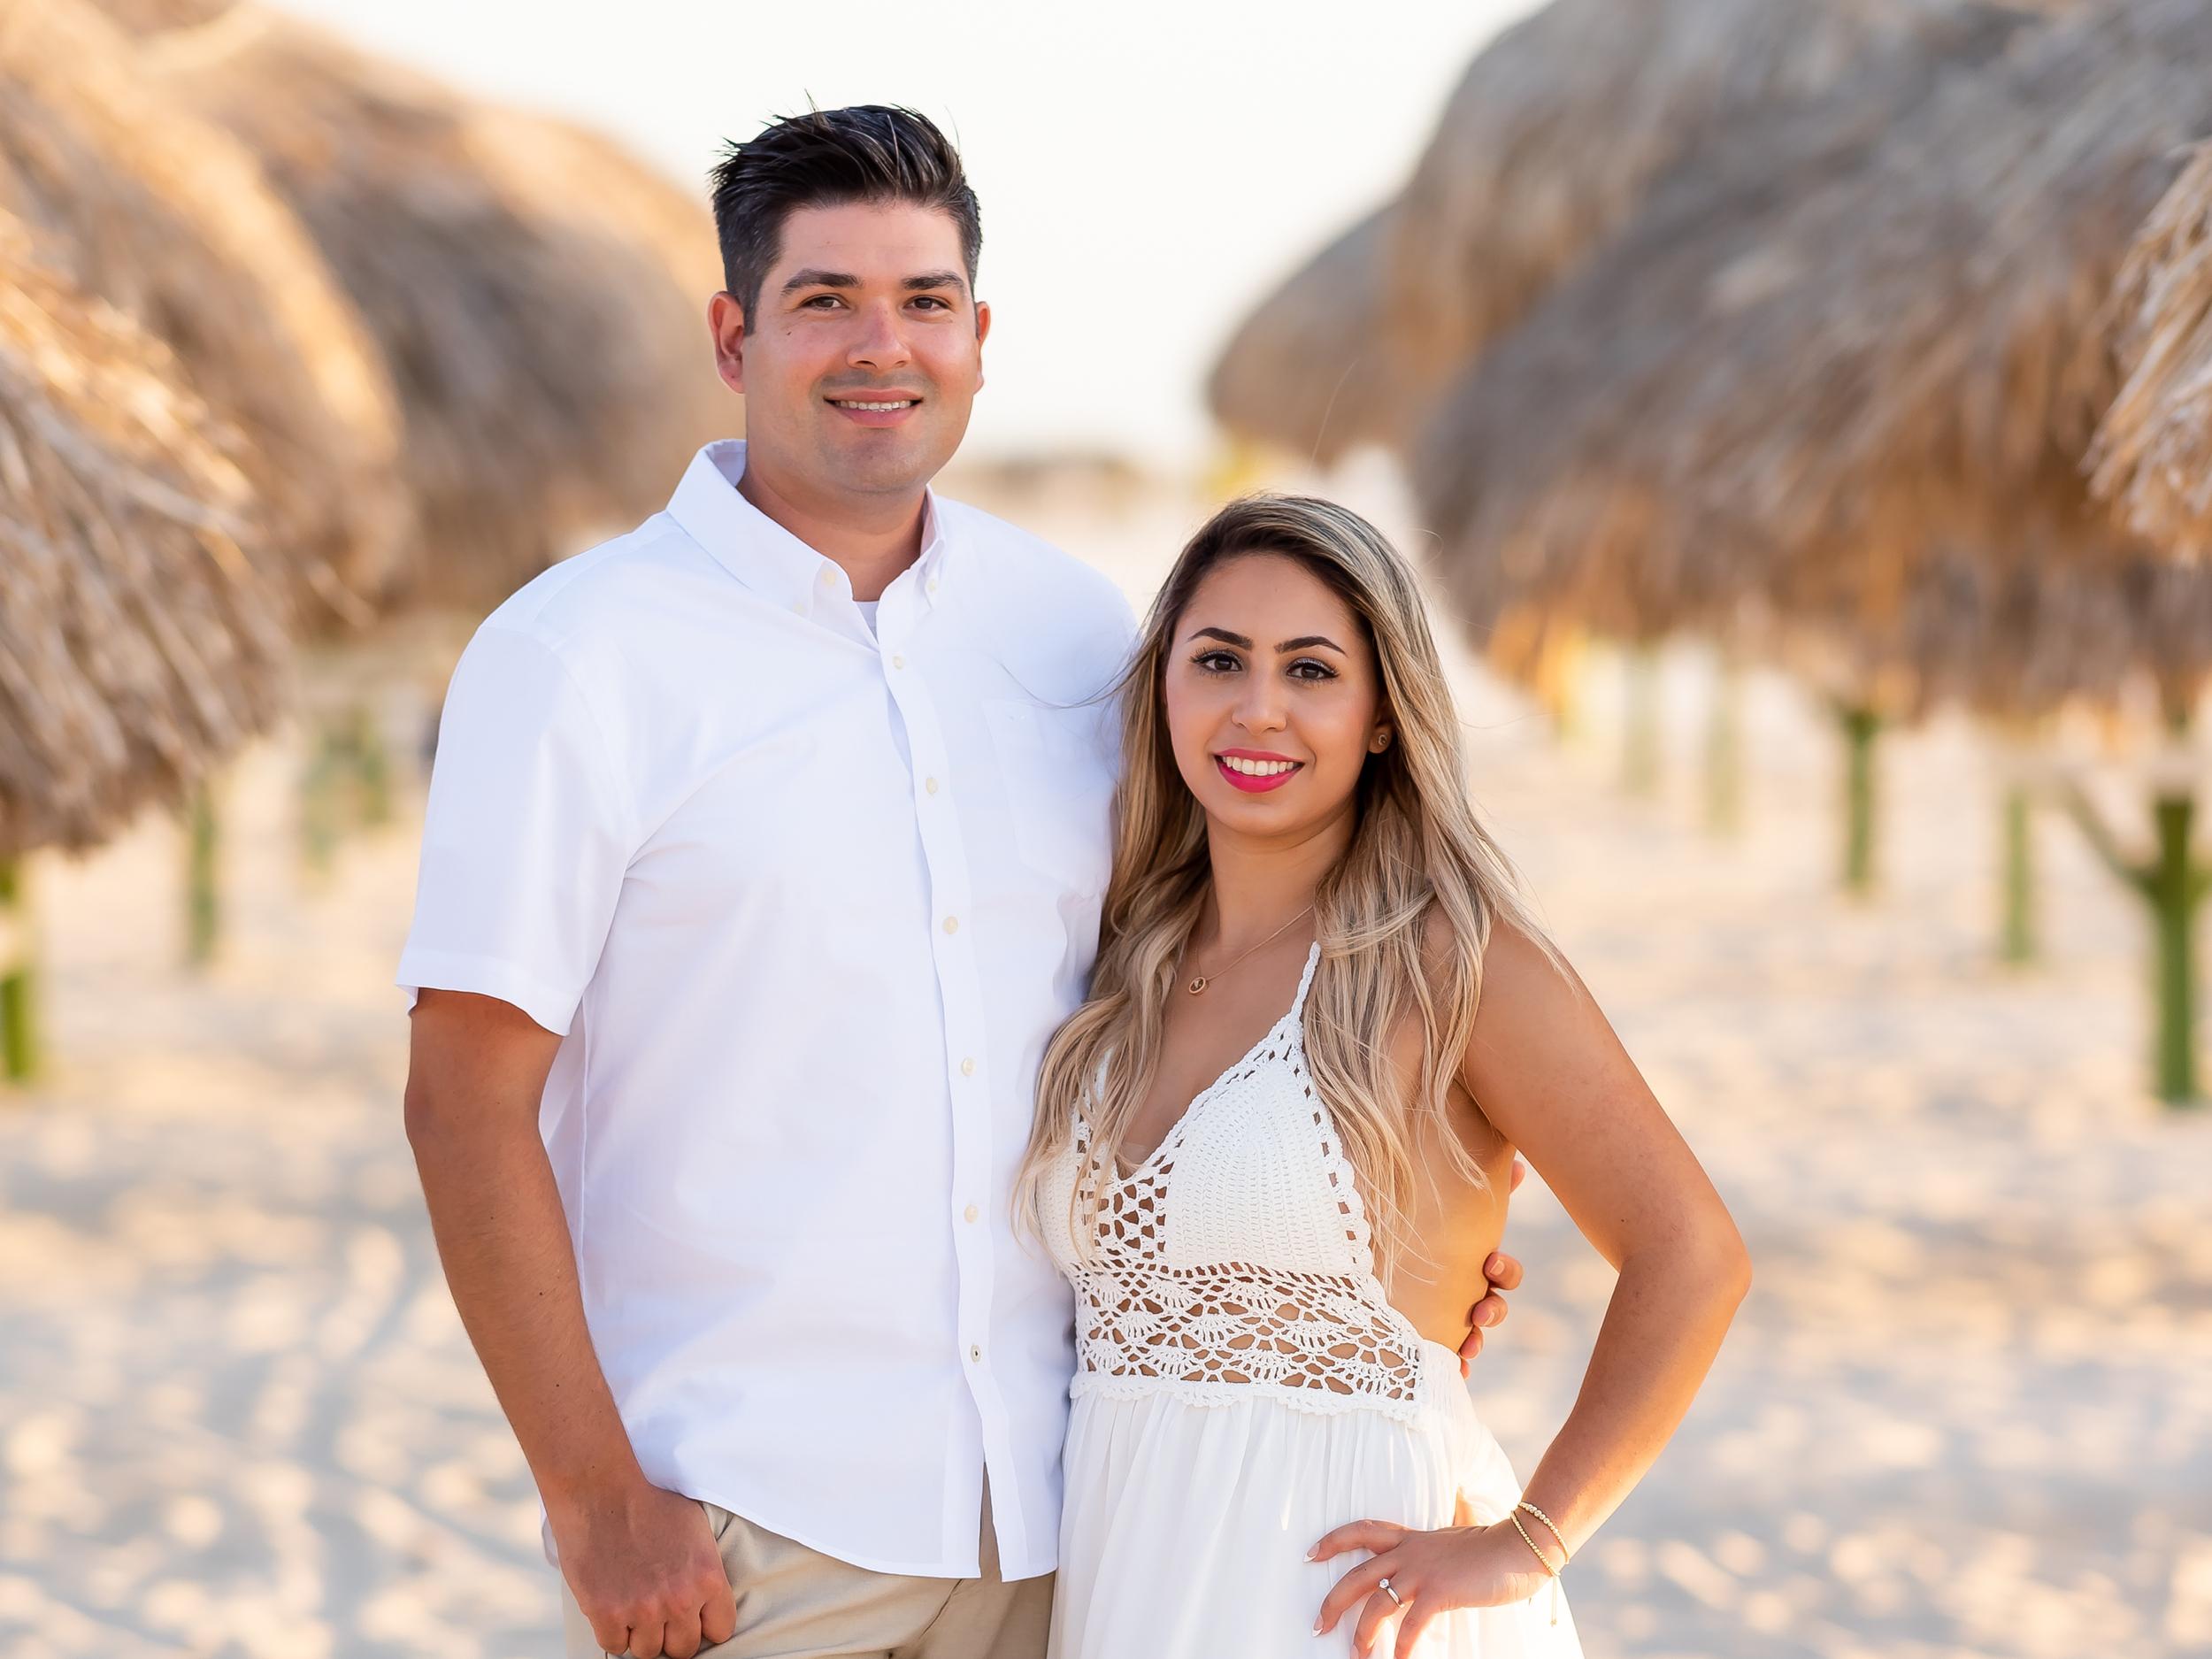 The Wedding Website of Adrian Mejia and Pegah Ostad